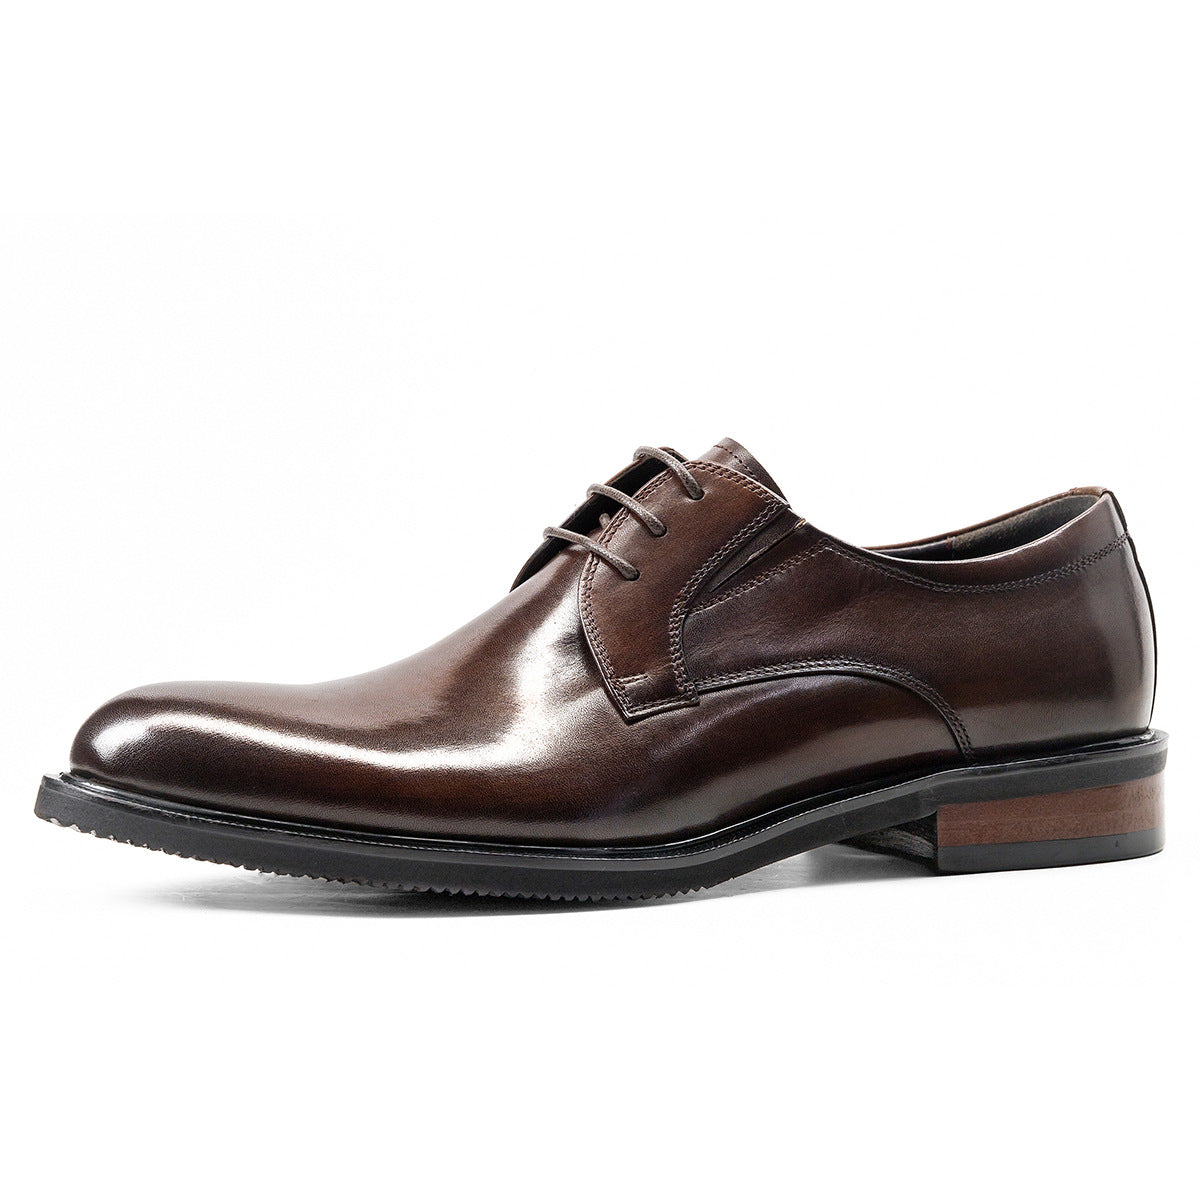 Men's Make Difference! Wire Drawing Craft Derby Shoes! Leather Shoes